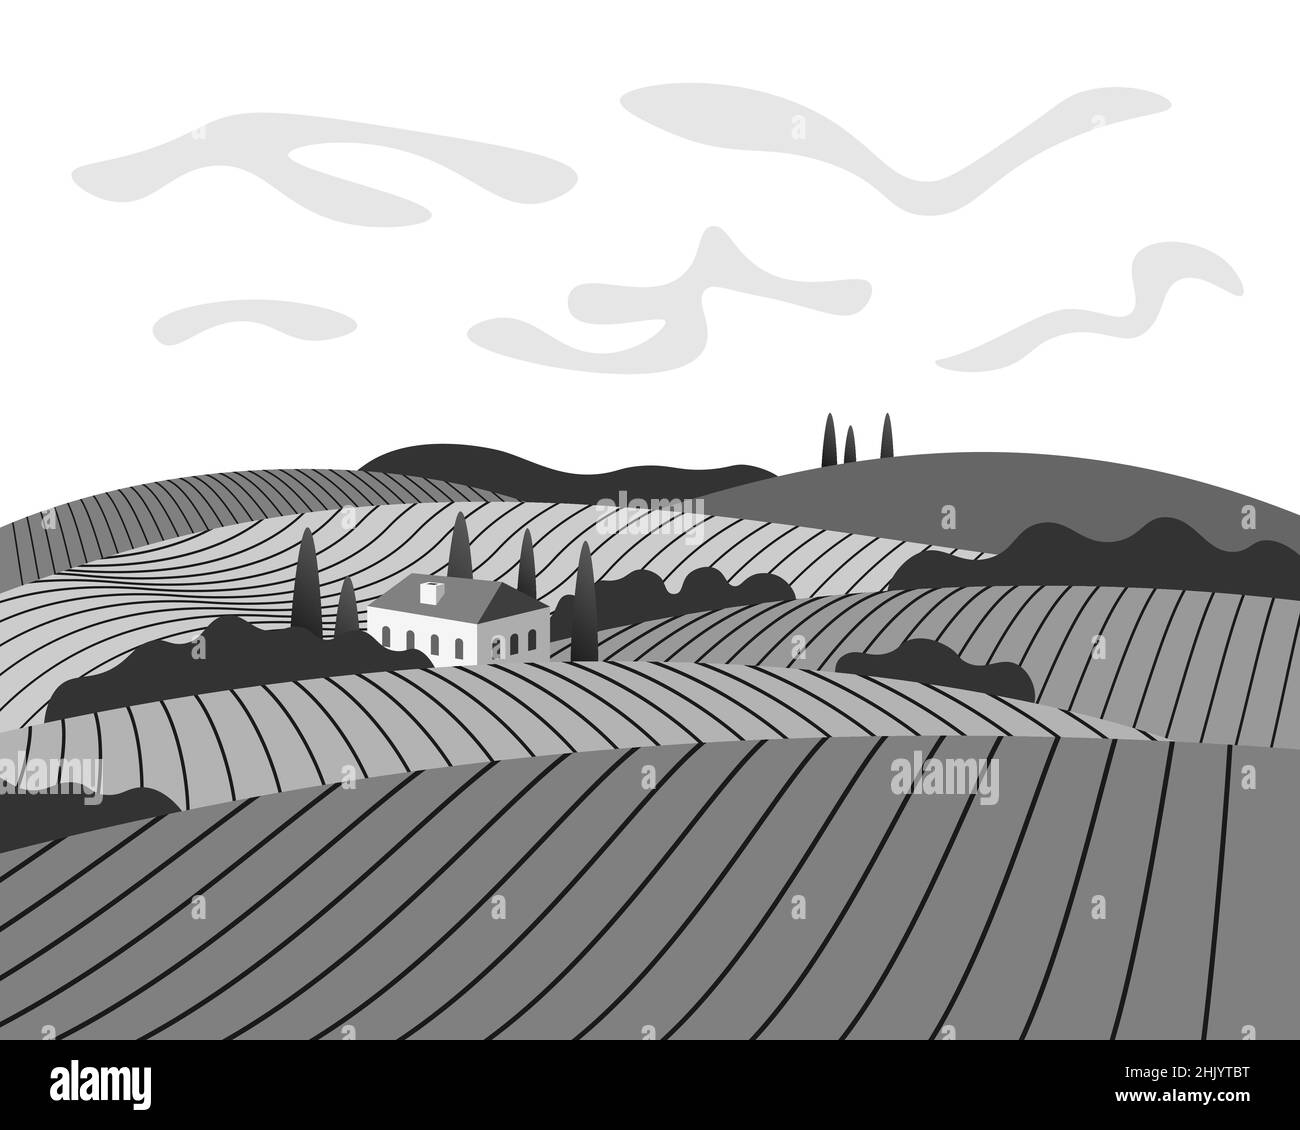 Vineyard wine grapes hills farm banner concept. Romantic rural vines plantation rows landscape with villa, fields, meadows and trees. Vector eps black and white growing grapevine illustration Stock Vector